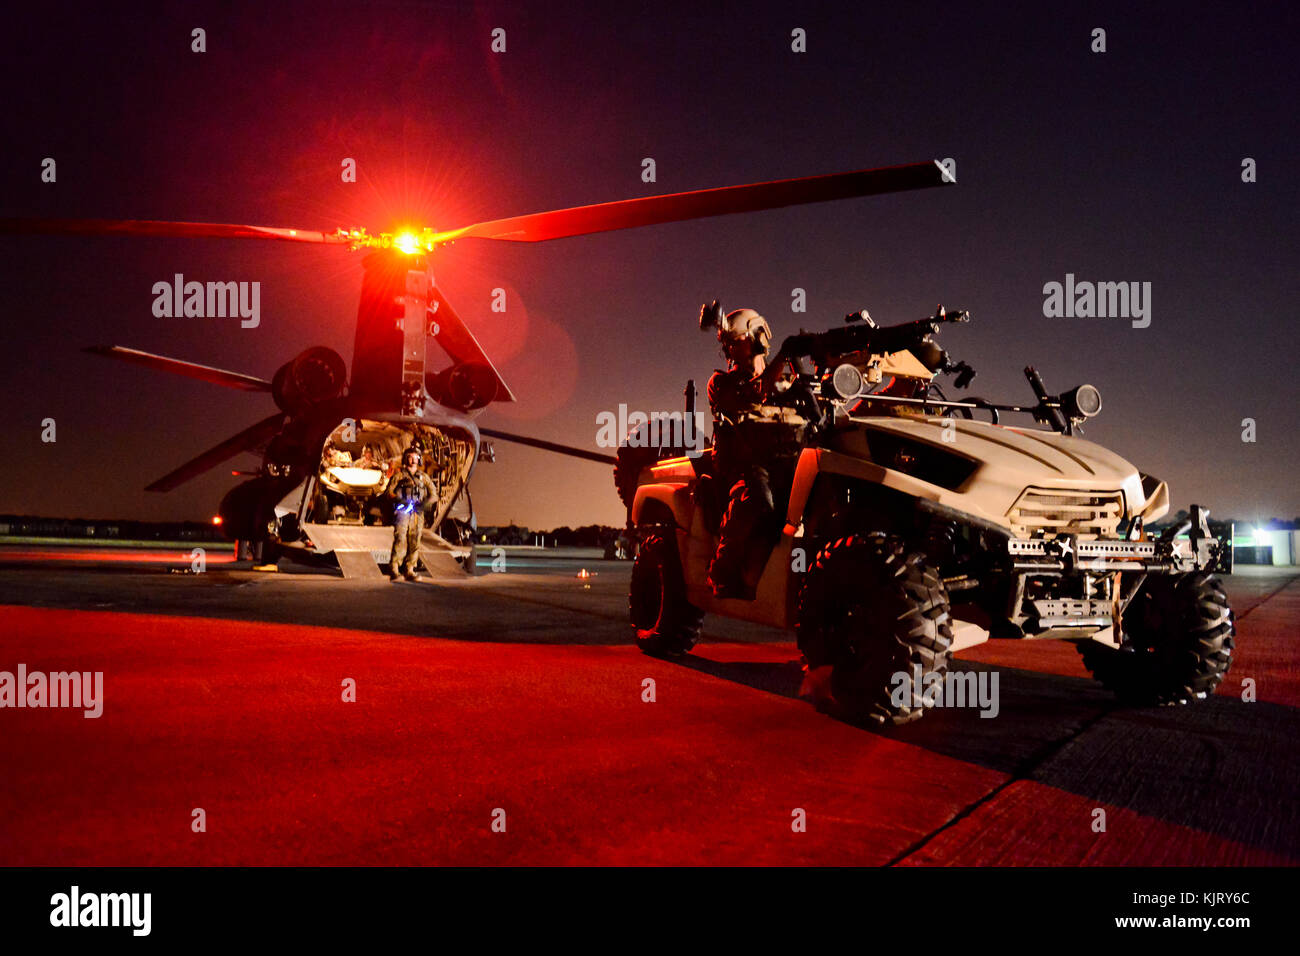 A U.S. Army special forces lightweight all-terrain vehicle is loaded on to a U.S. Army CH-47 Chinook helicopter at the McEntire Joint National Guard Base at night May 20, 2014 in Hopkins, South Carolina. (photo by Jorge Intriago via Planetpix) Stock Photo